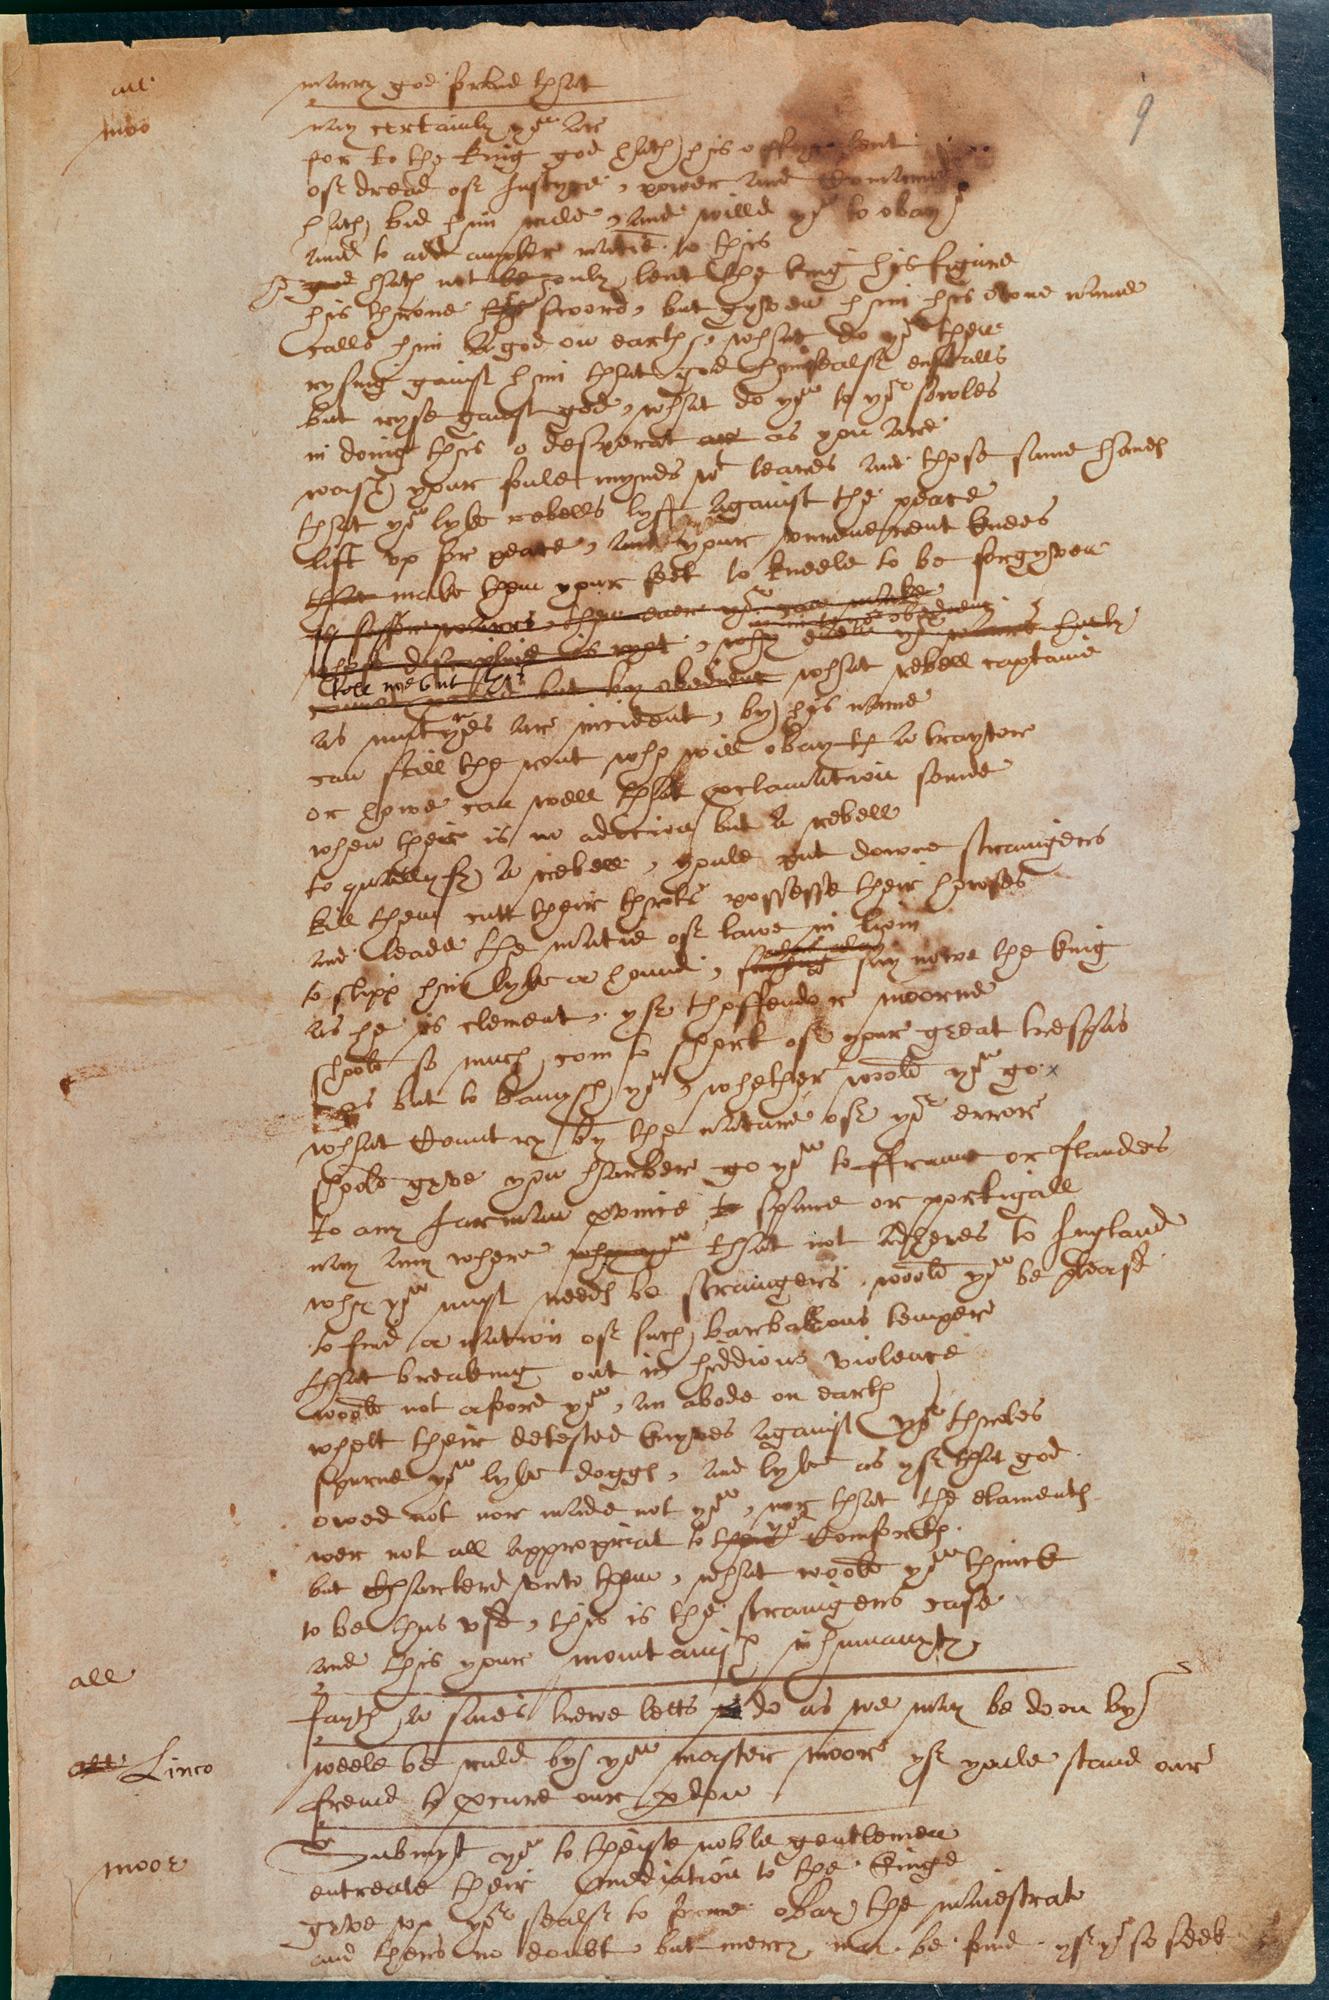 Shakespeare's handwriting in the Book of Sir Thomas More